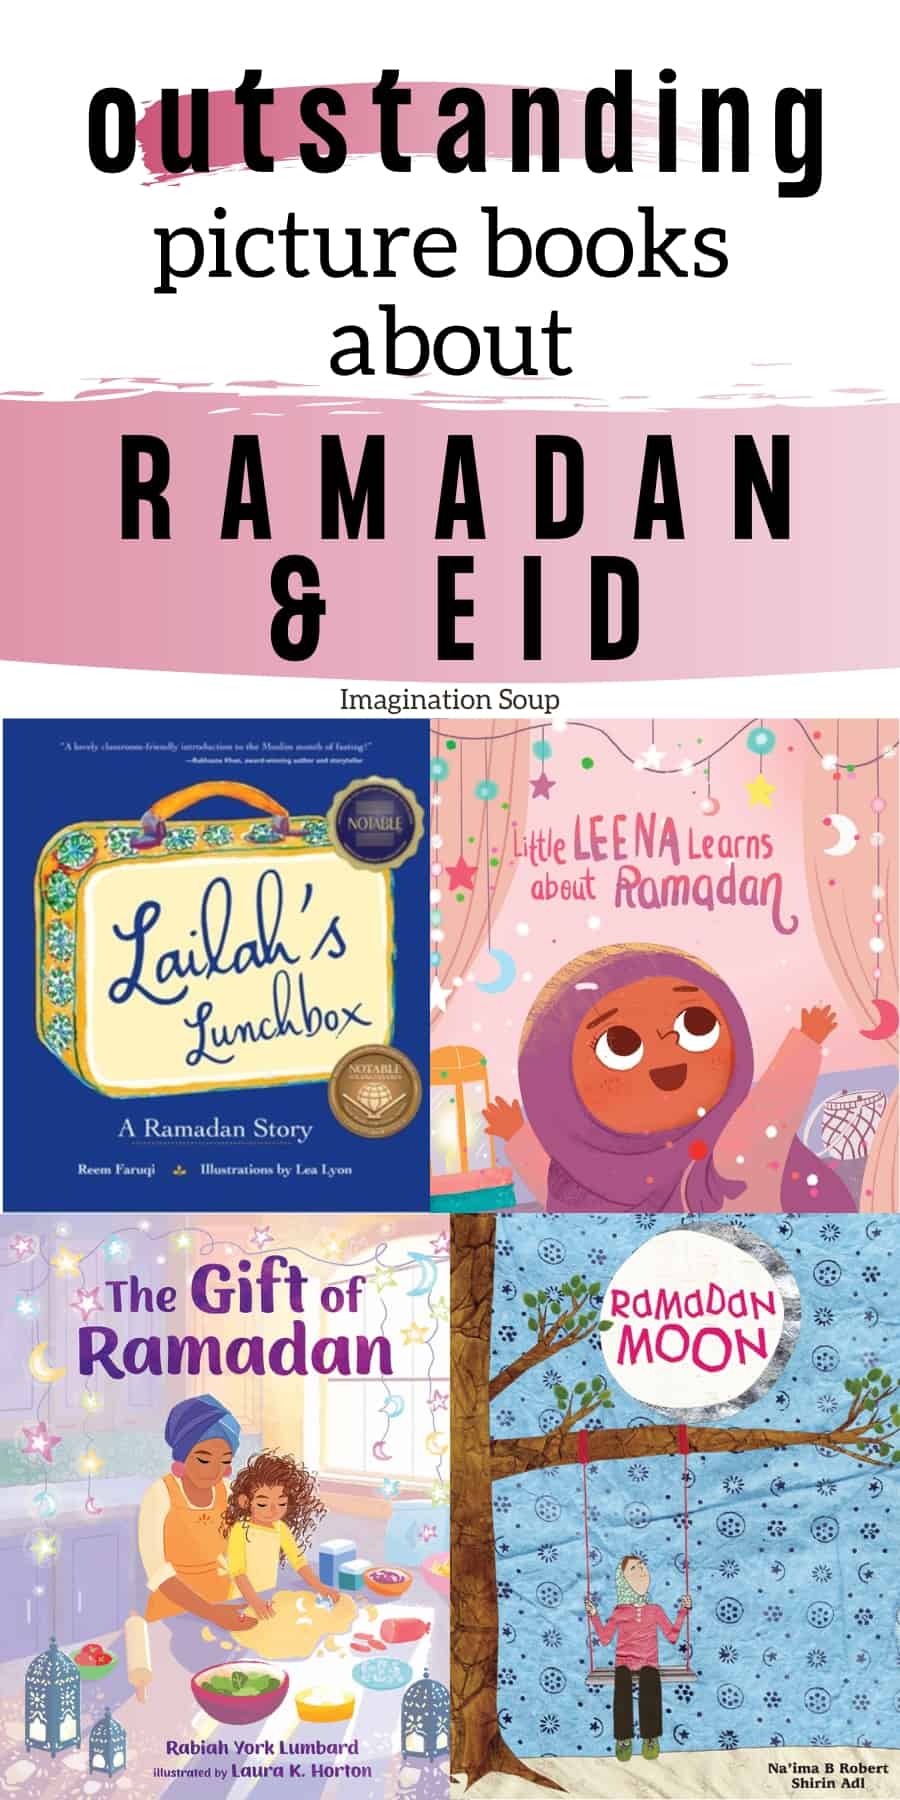 If you want to learn more about these two Islamic holidays, here are some fantastic picture books about the Muslim celebrations of Ramadan and Eid.